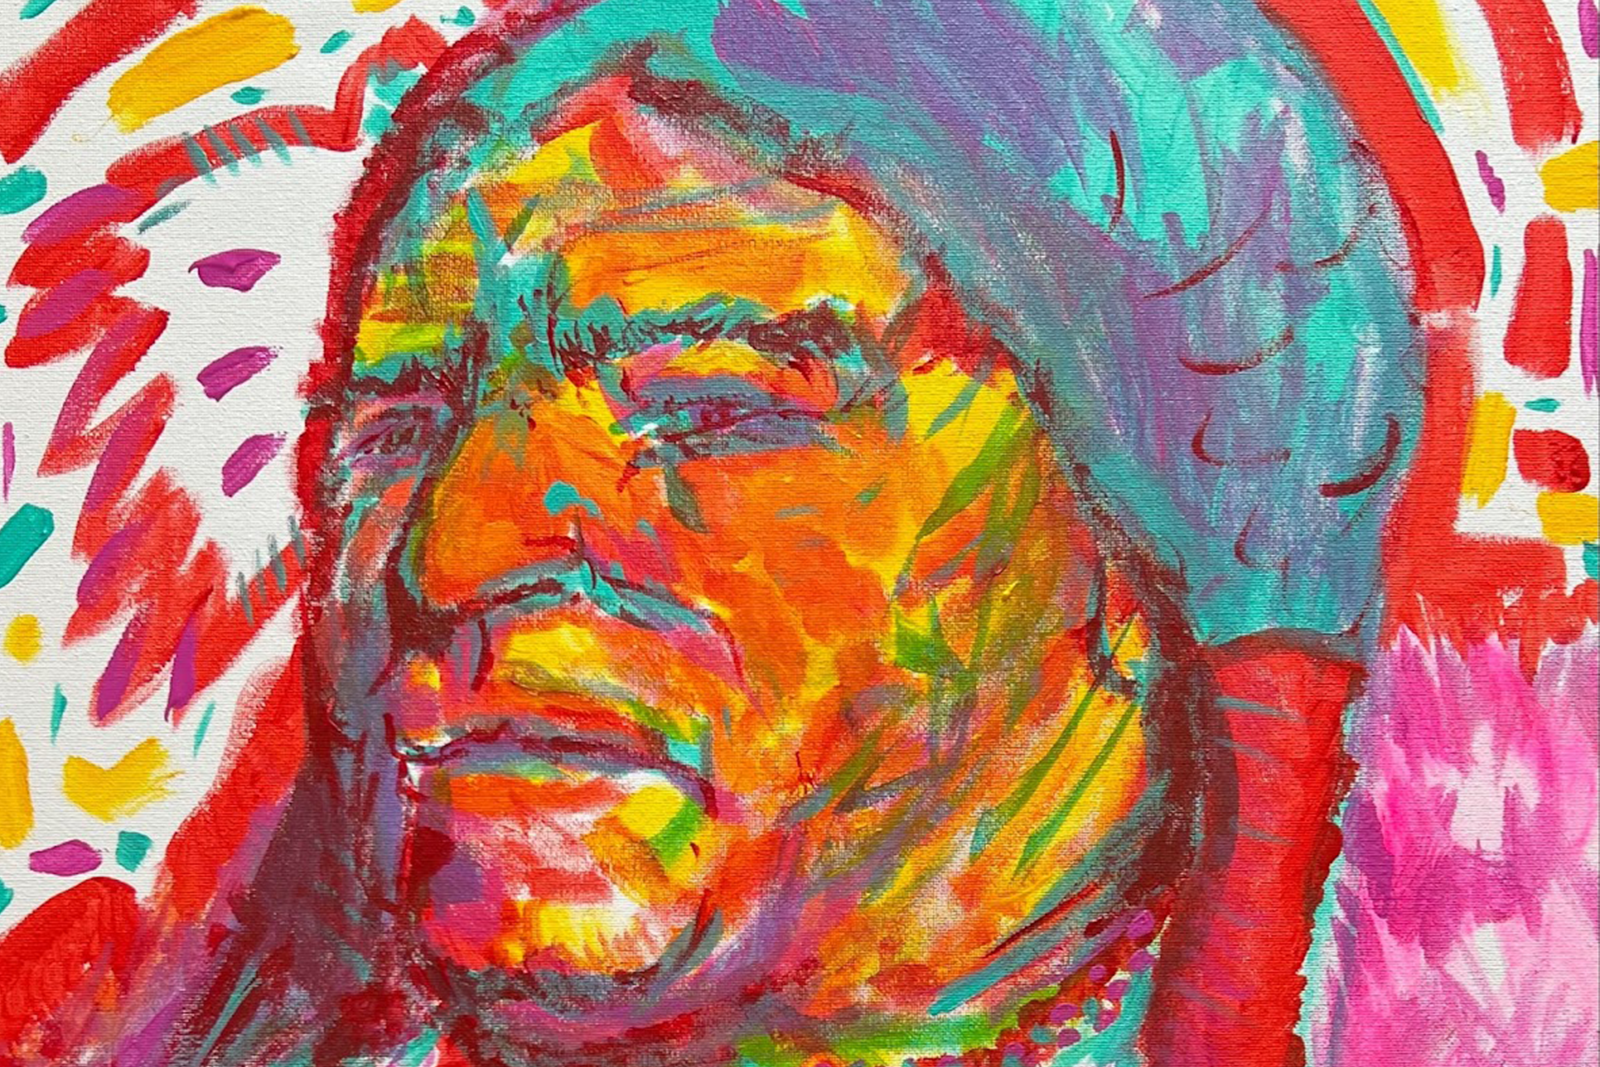 Happenings size image of an illustration by artist Nathanial Ruleaux It is a crop of a portrait of a native american man rendered in a vibrant array of bright colors